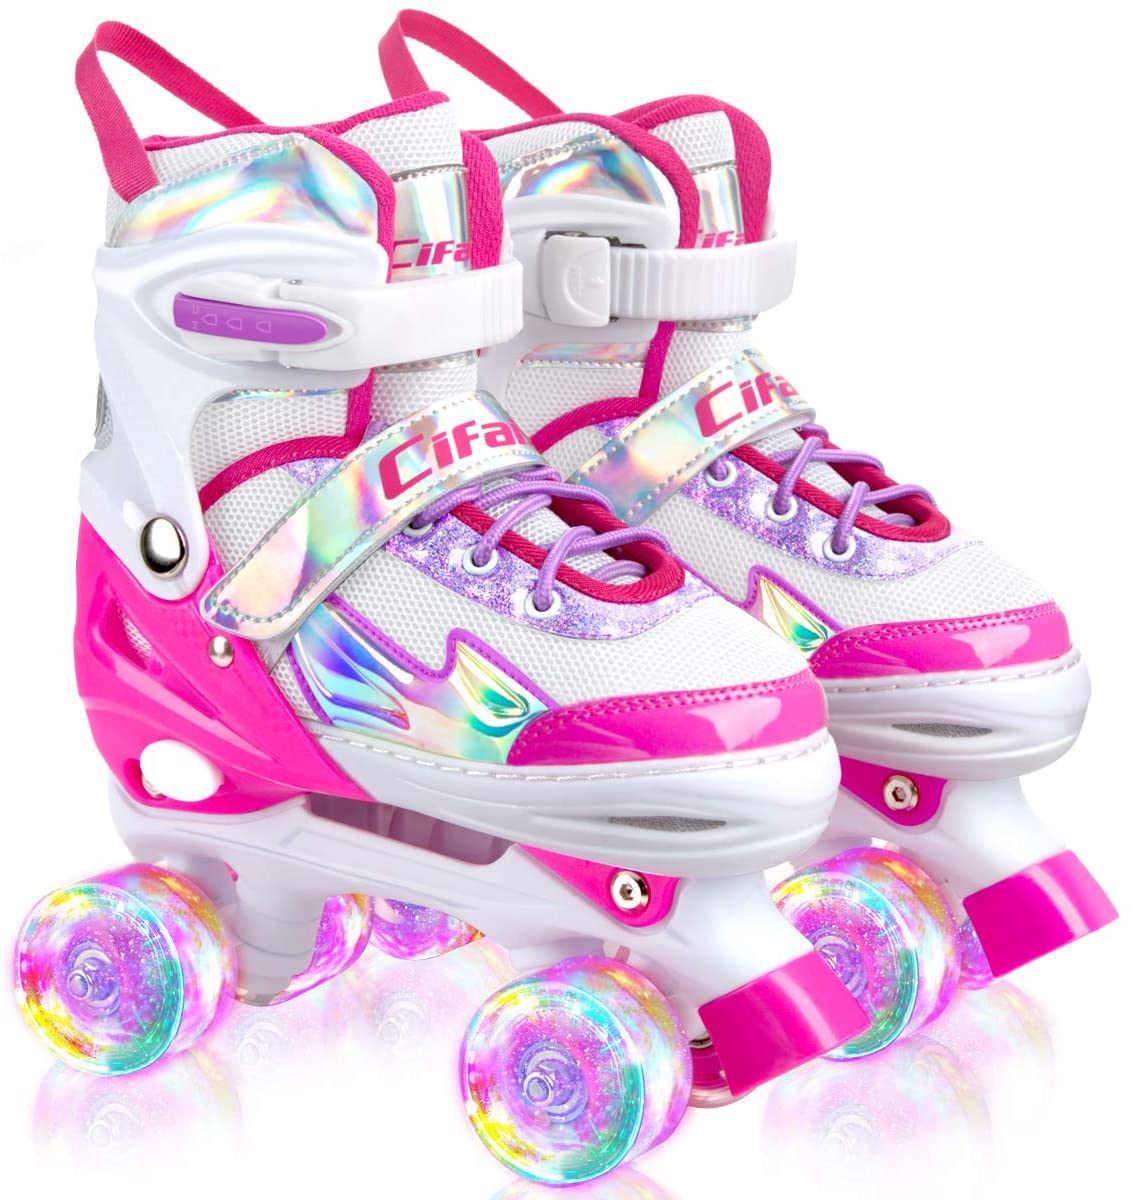 Marcent Roller Skates for Girls Boys Women Beginners Indoor and Outdoor Kids Adjustable Roller Skating with All Light up Wheels Pink/Purple